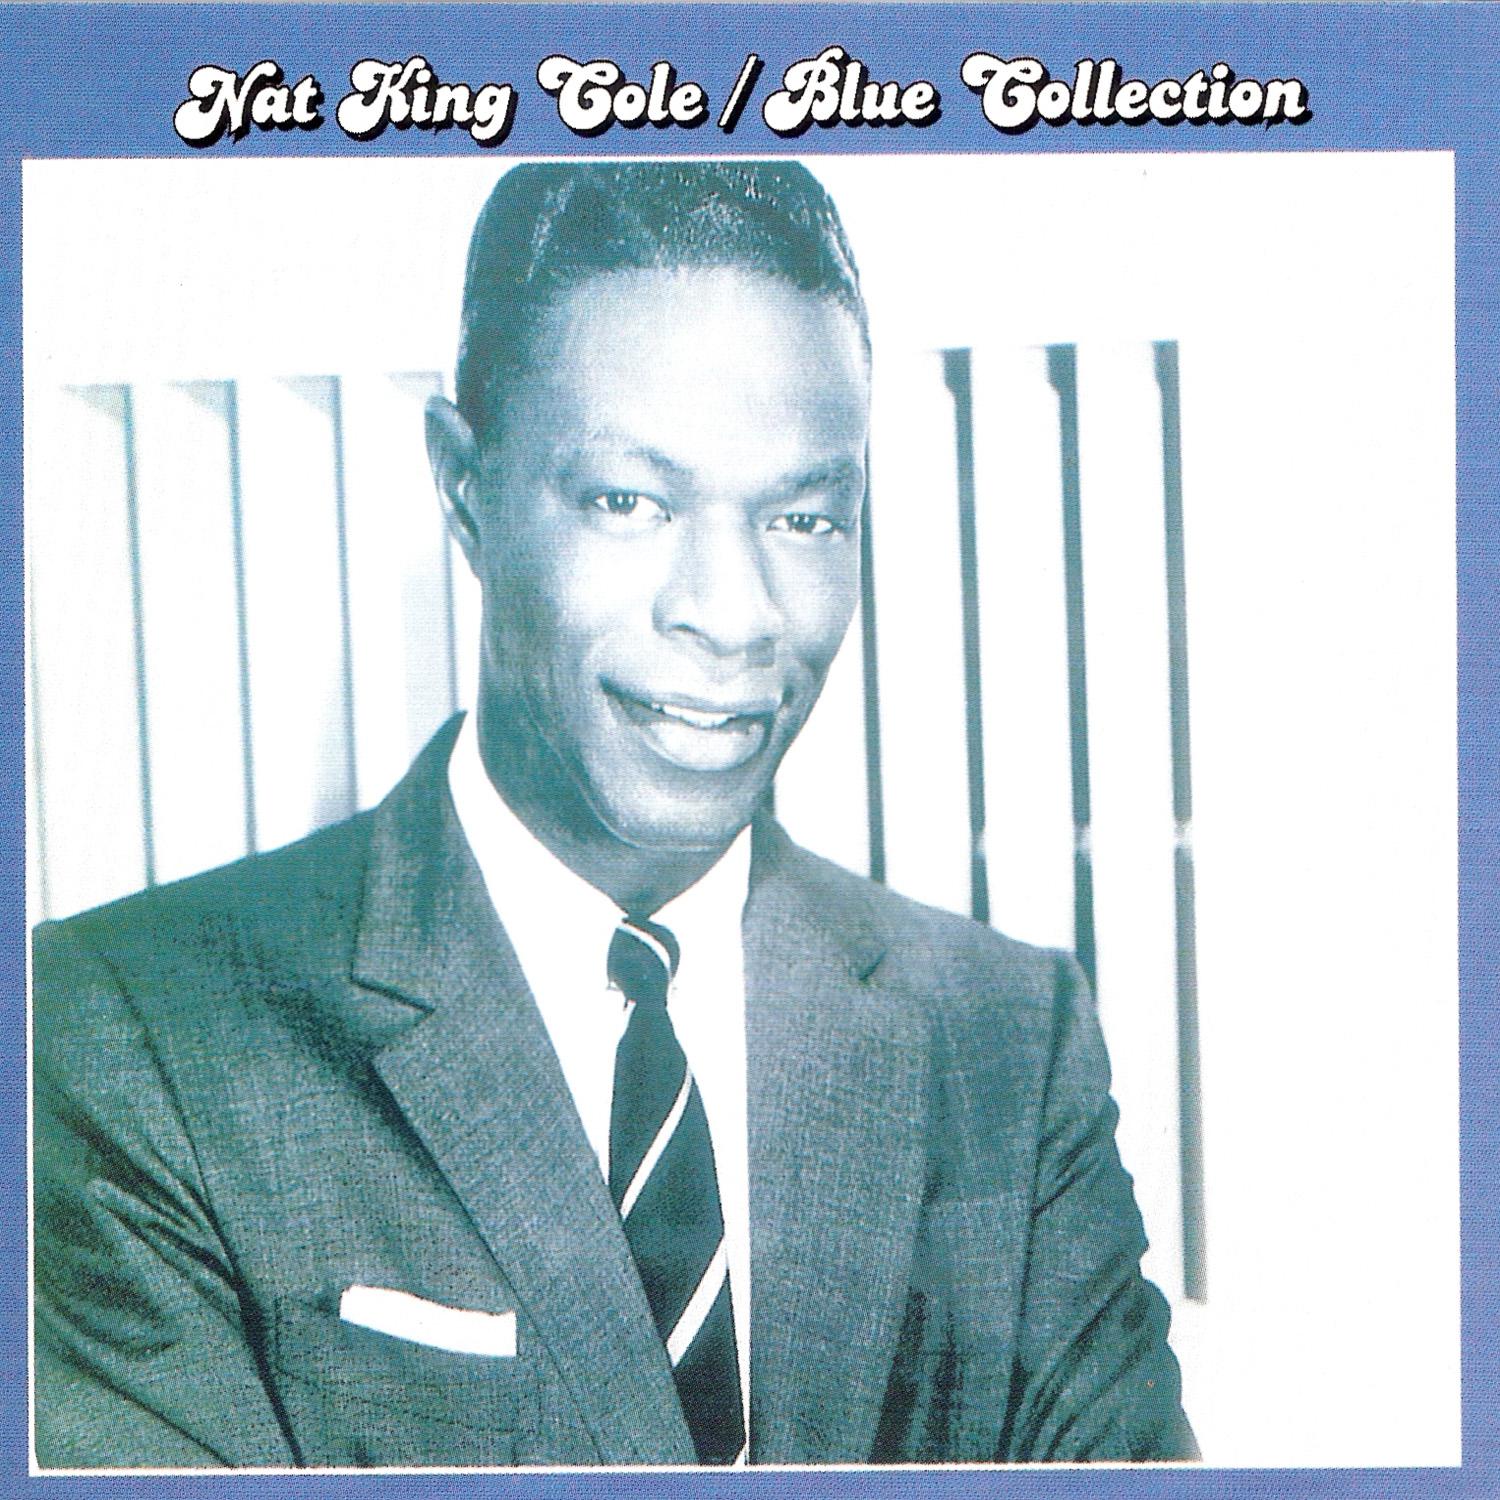 Blue Collection: Nat King Cole